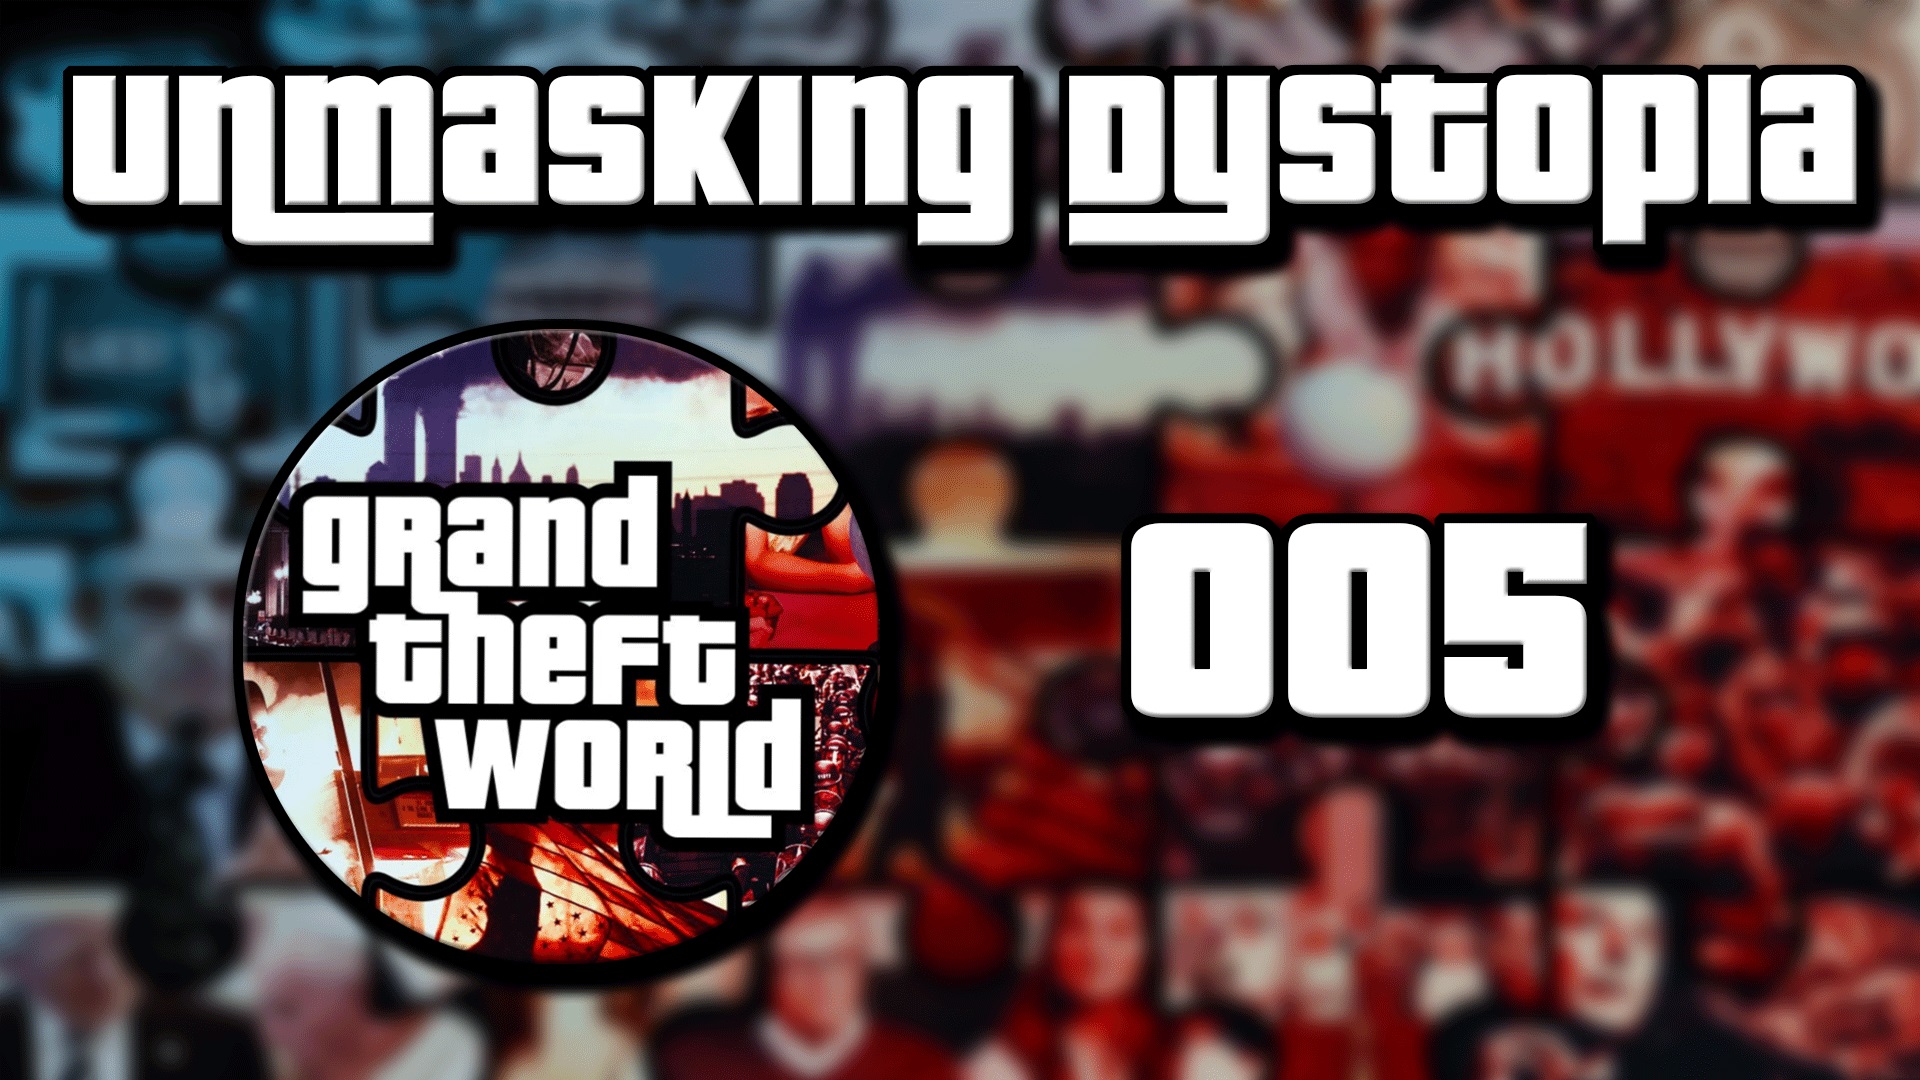 Grand Theft World Podcast 005 | Unmasking Dystopia